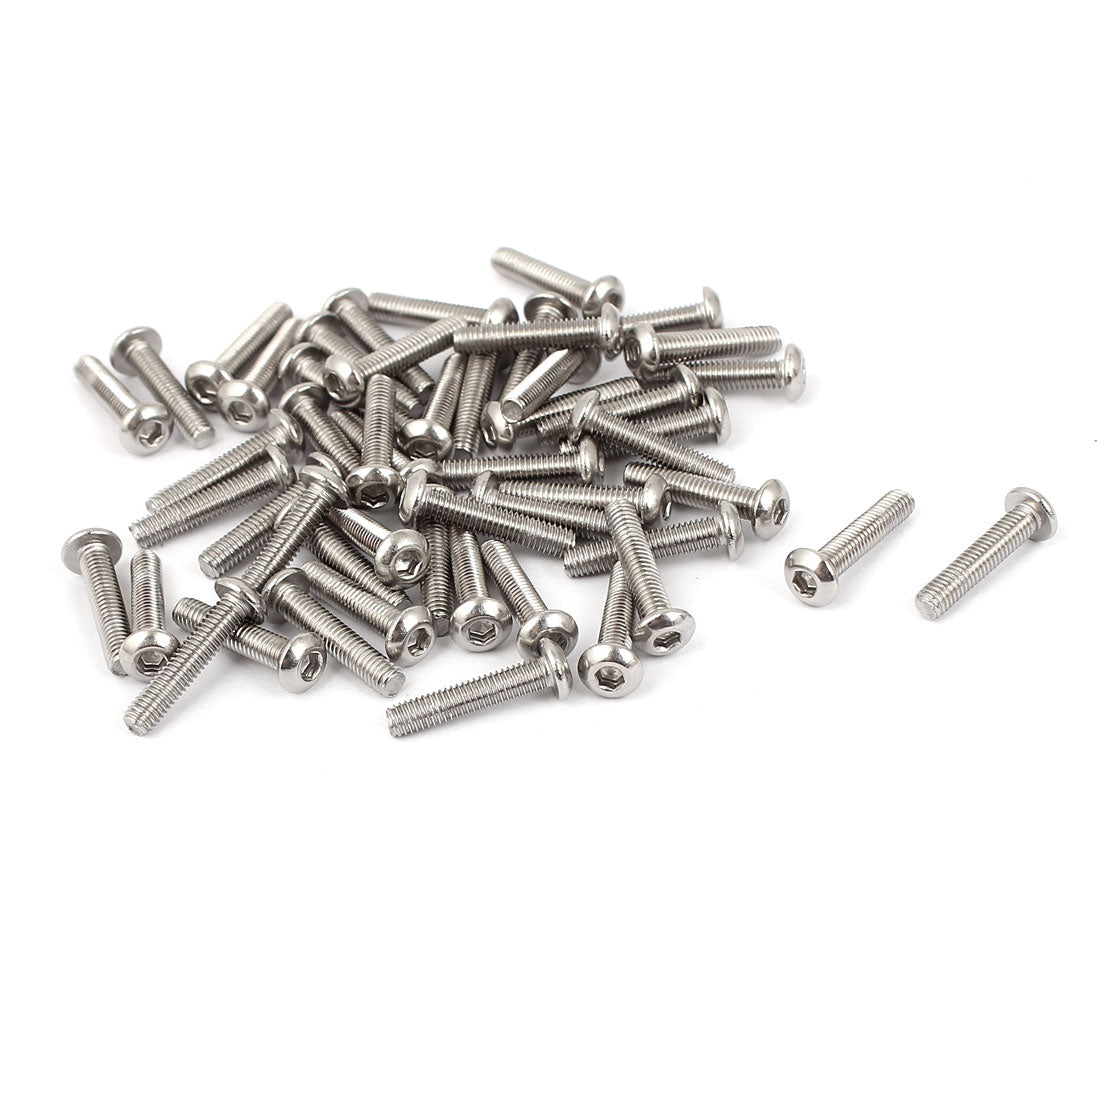 uxcell Uxcell M3 x 14mm Stainless Steel Button Head Socket Cap Screw 50 Pcs